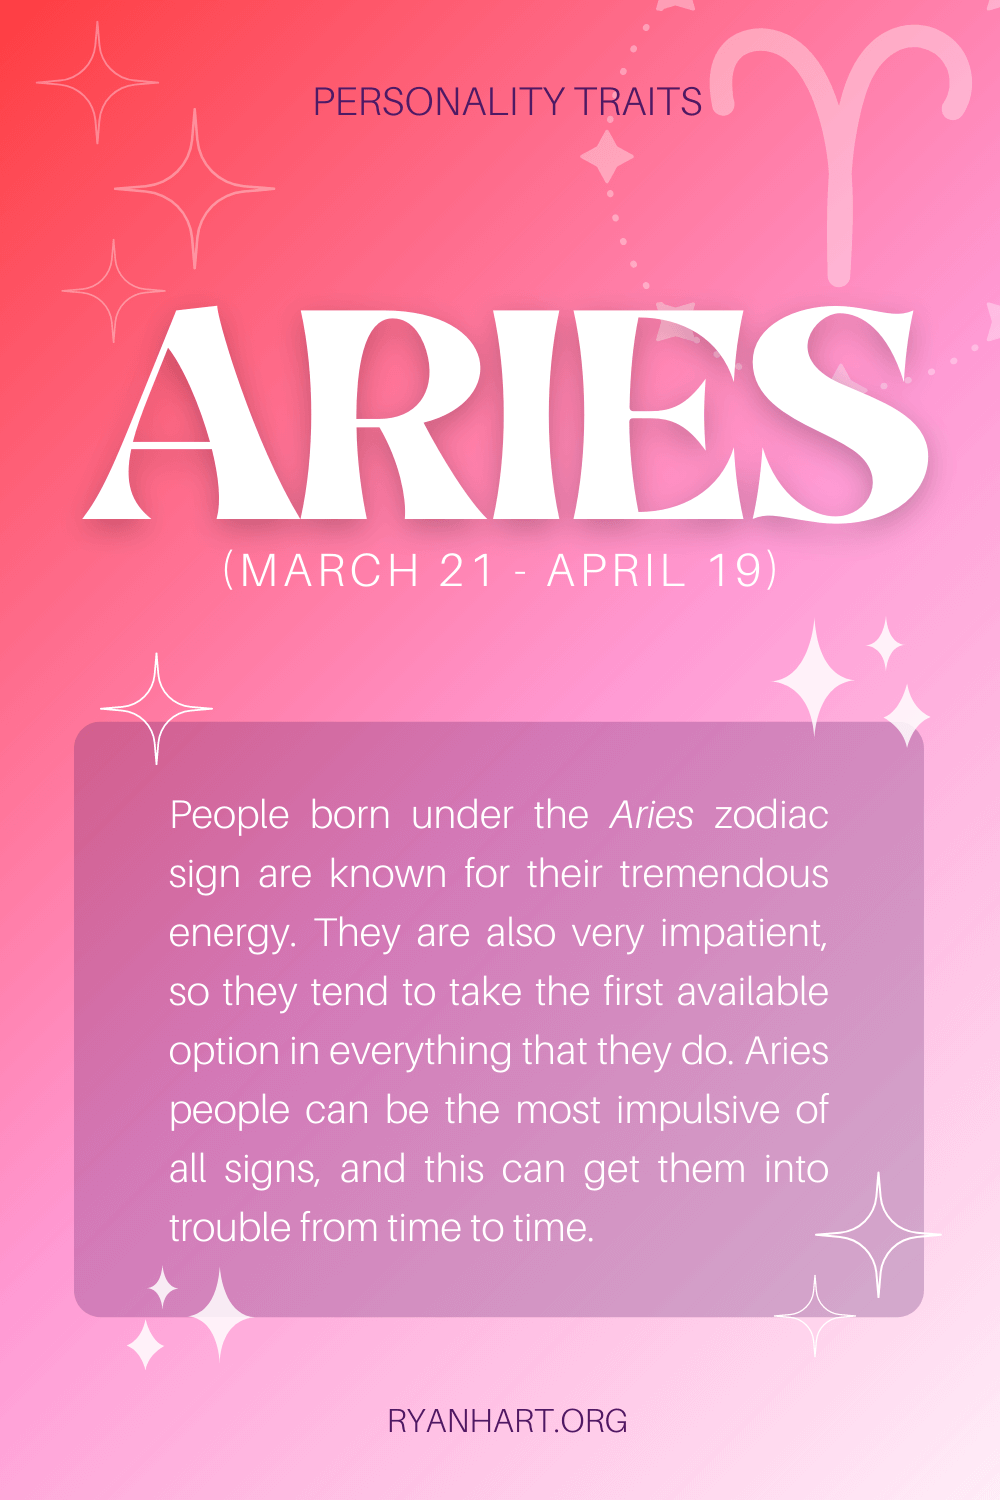 is 2023 a good year for aries